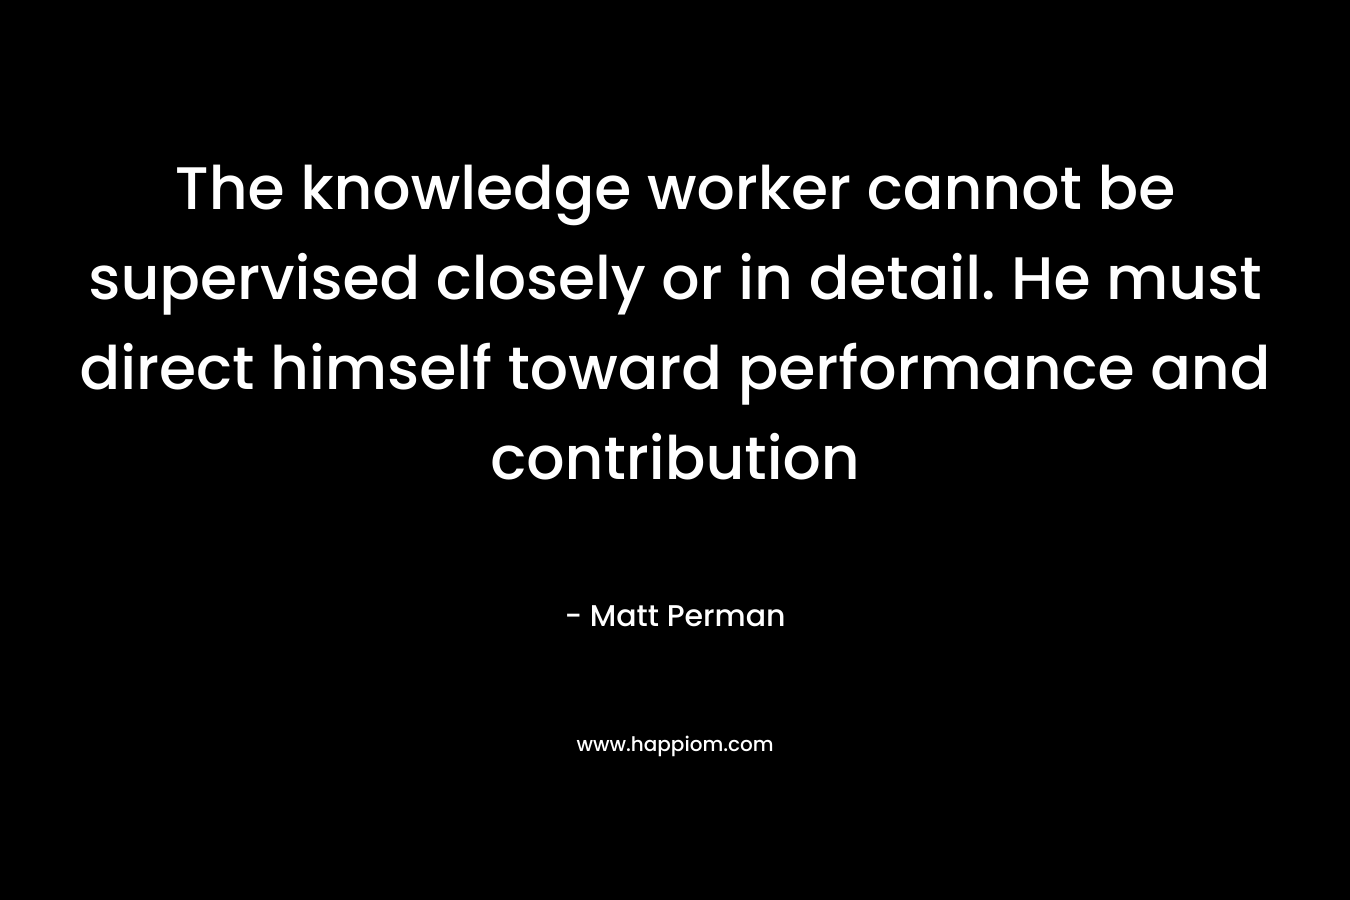 The knowledge worker cannot be supervised closely or in detail. He must direct himself toward performance and contribution